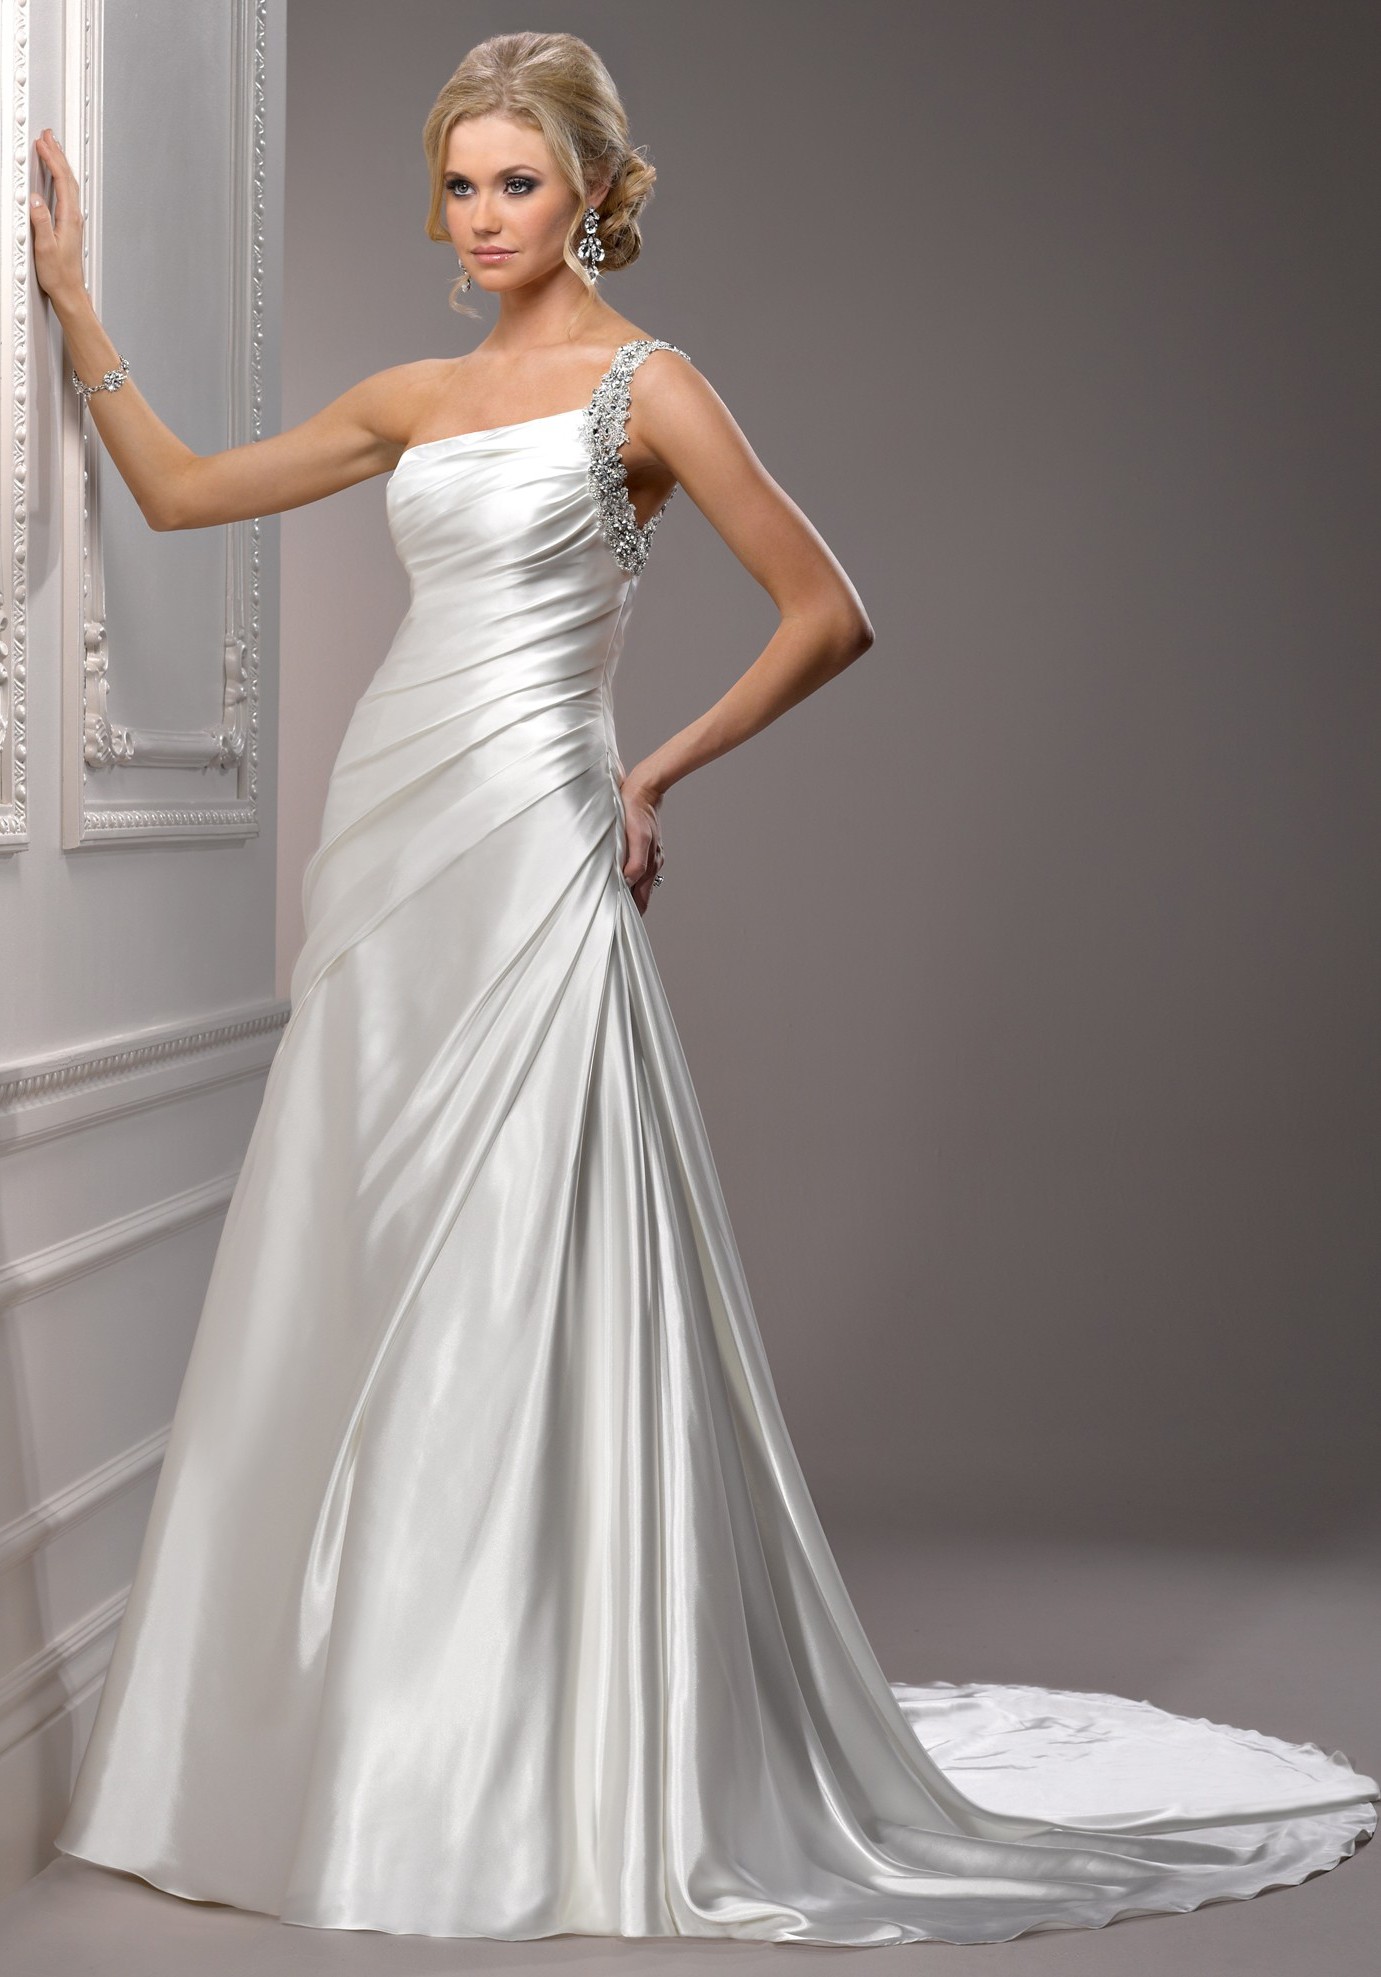 Great Satin Wedding Dress in 2023 Don t miss out | blackwedding3